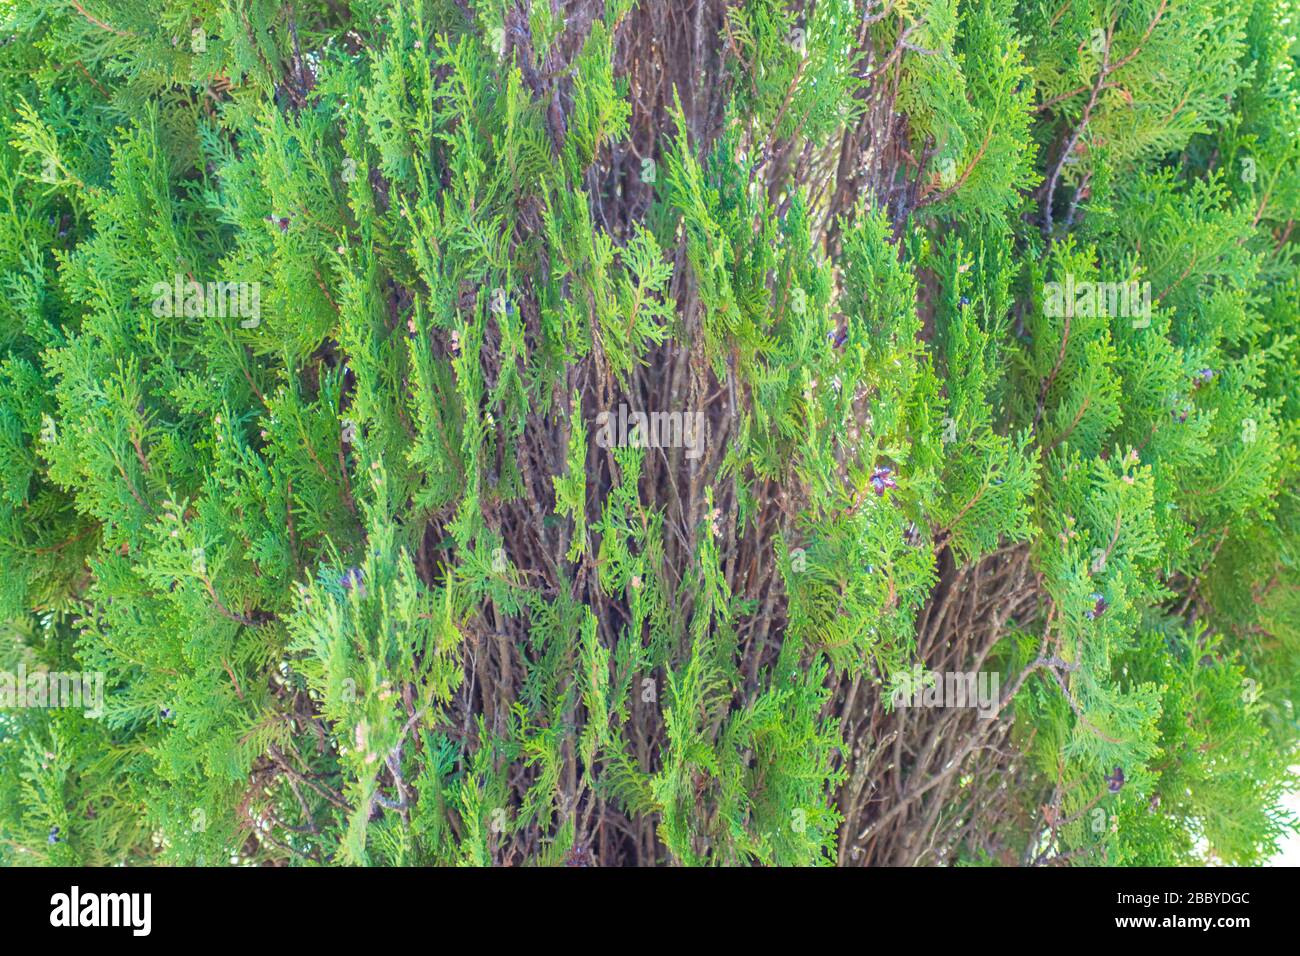 Green evergreen leaves of thuja hedgerow close-up, nature texture, background, outdoors, green plant Stock Photo